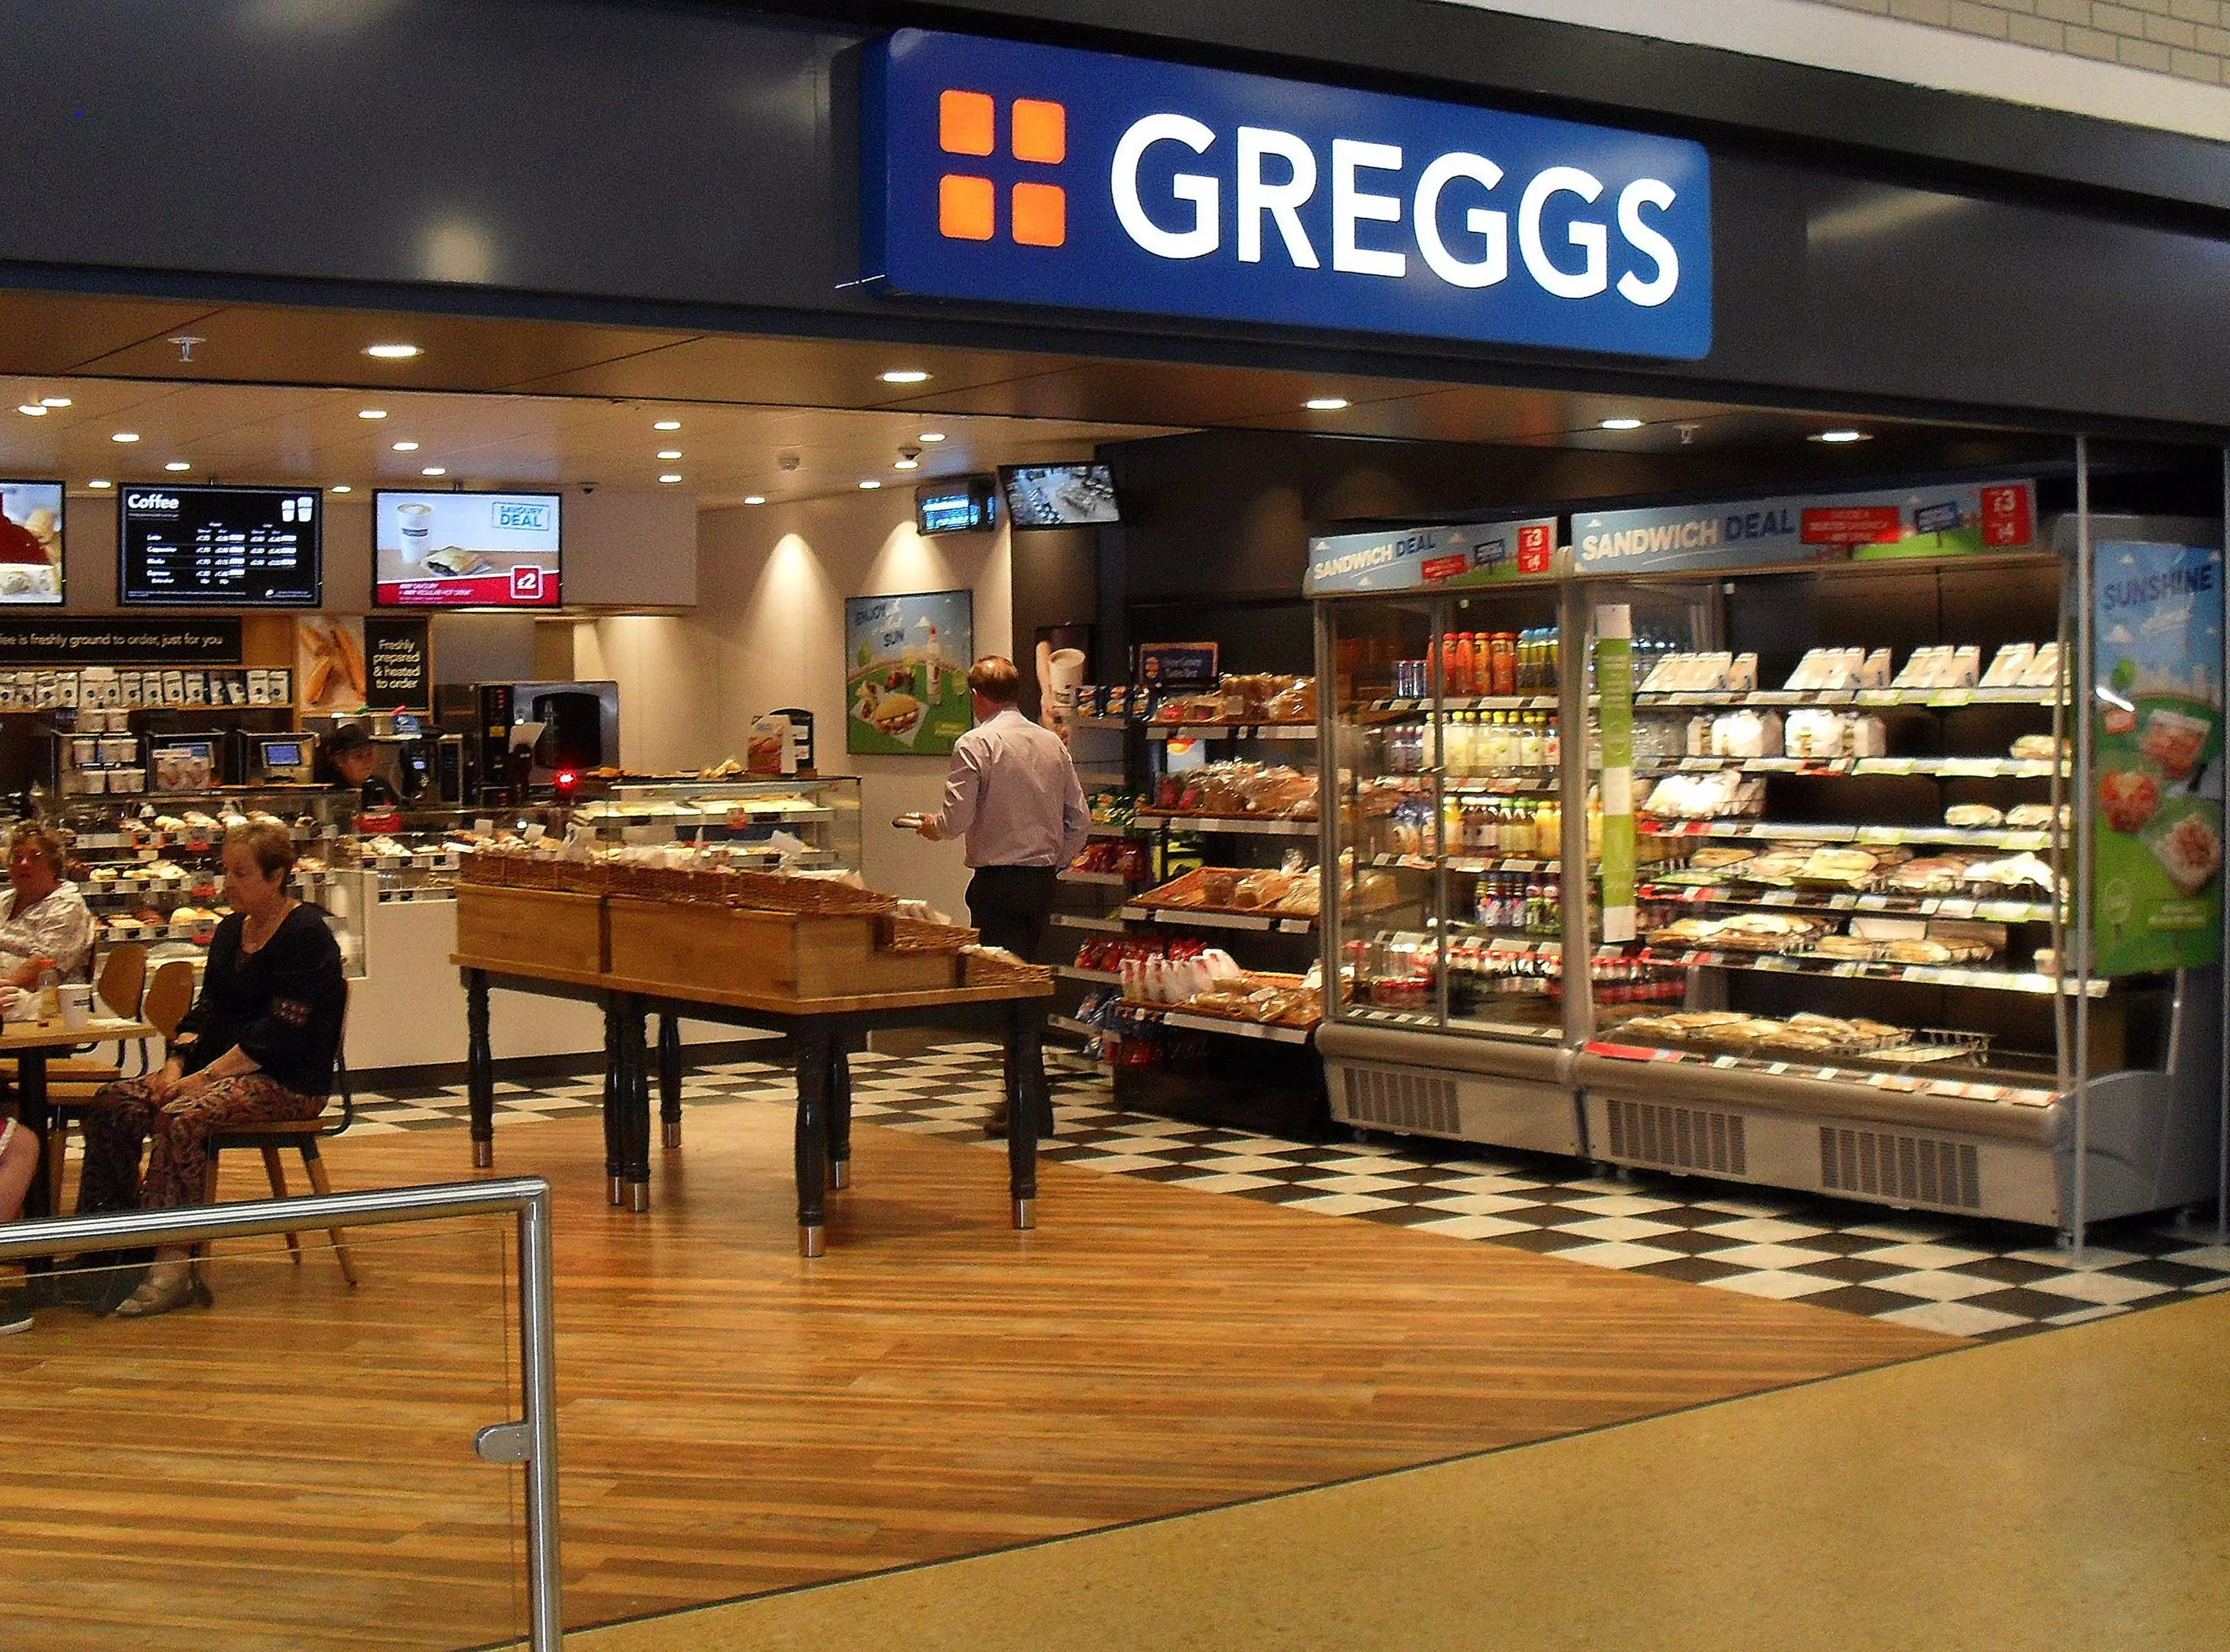 One of the more modern Greggs stores.